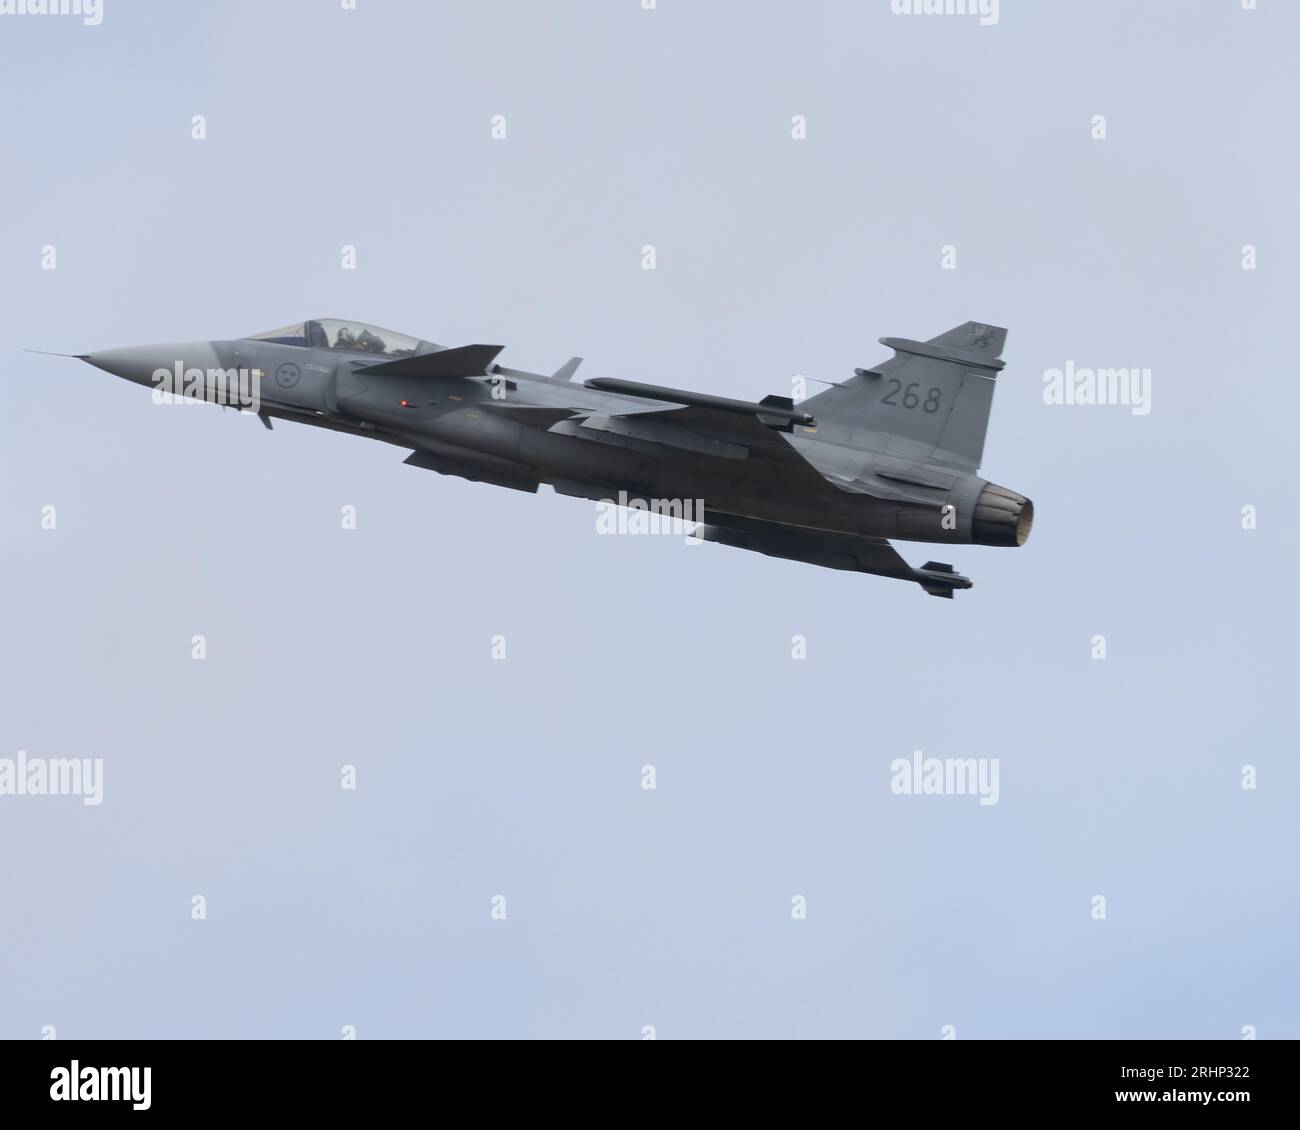 The Swedish Air Force SAAB JAS 39 Gripen light-weight multi-role fighter at the 2023 Royal International Air Tattoo Stock Photo